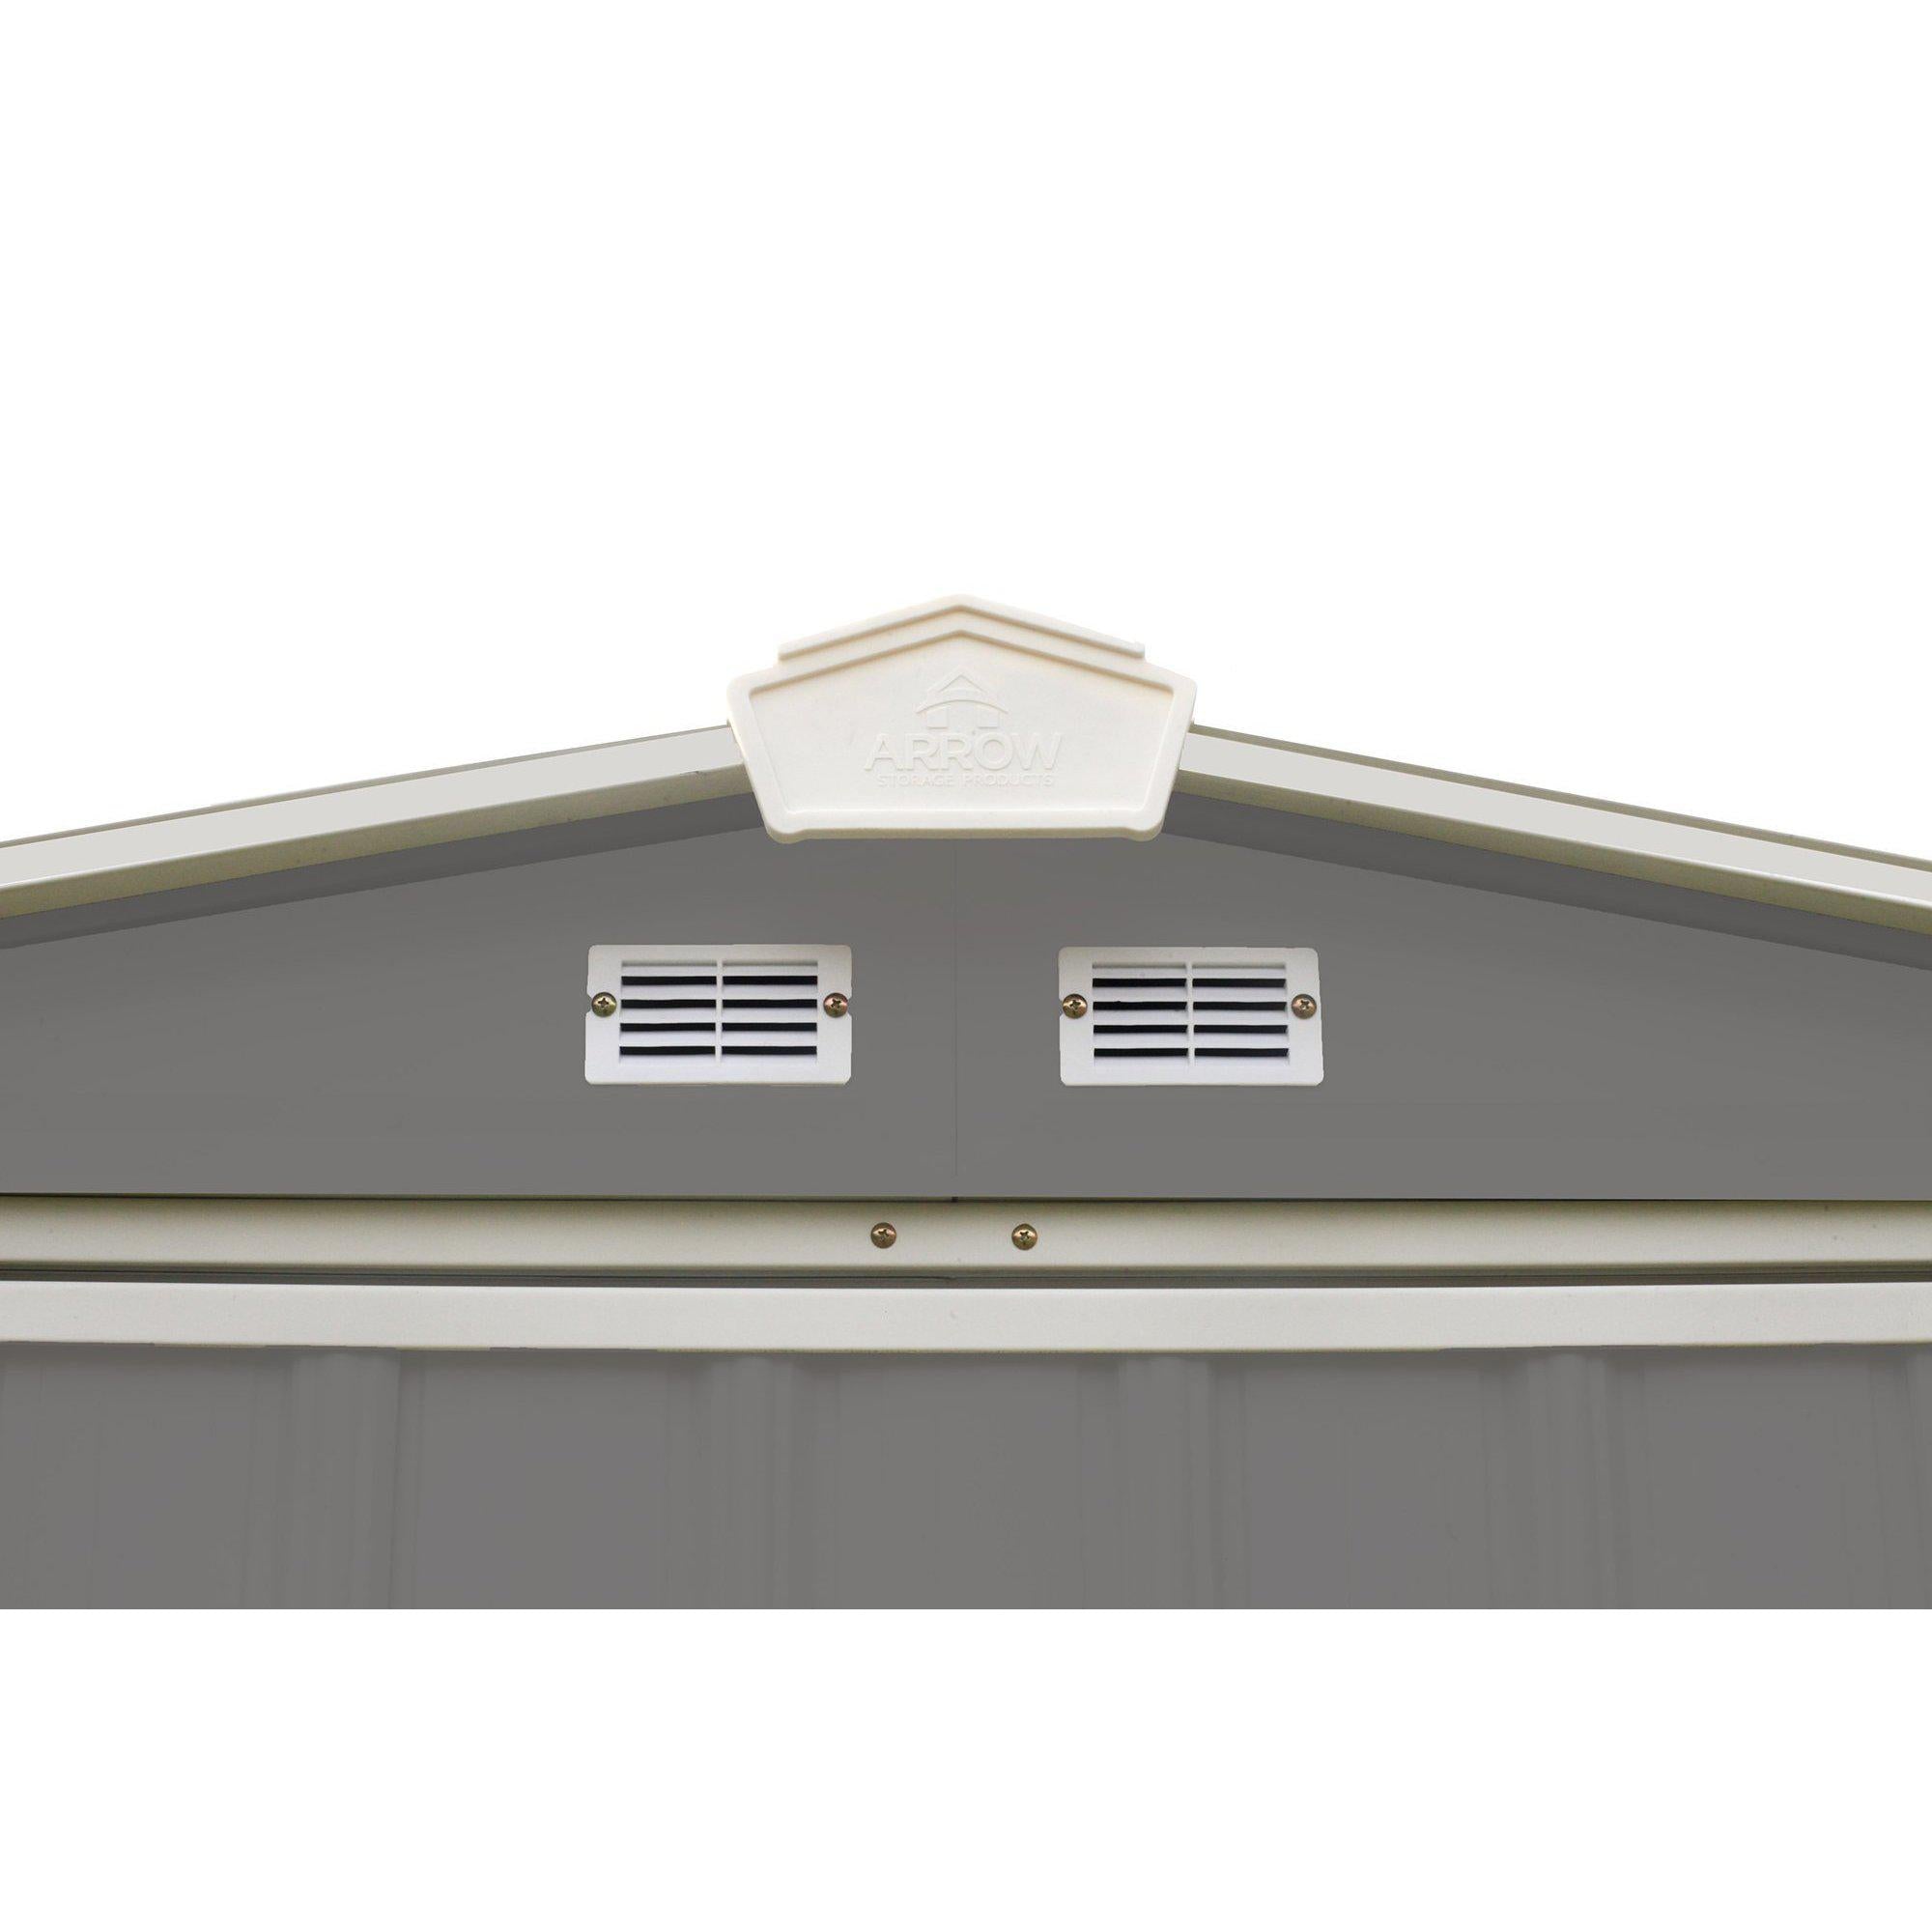 Arrow EZEE Shed Low Gable Steel Storage Shed, Charcoal/Cream Trim, 6 x 5 ft.